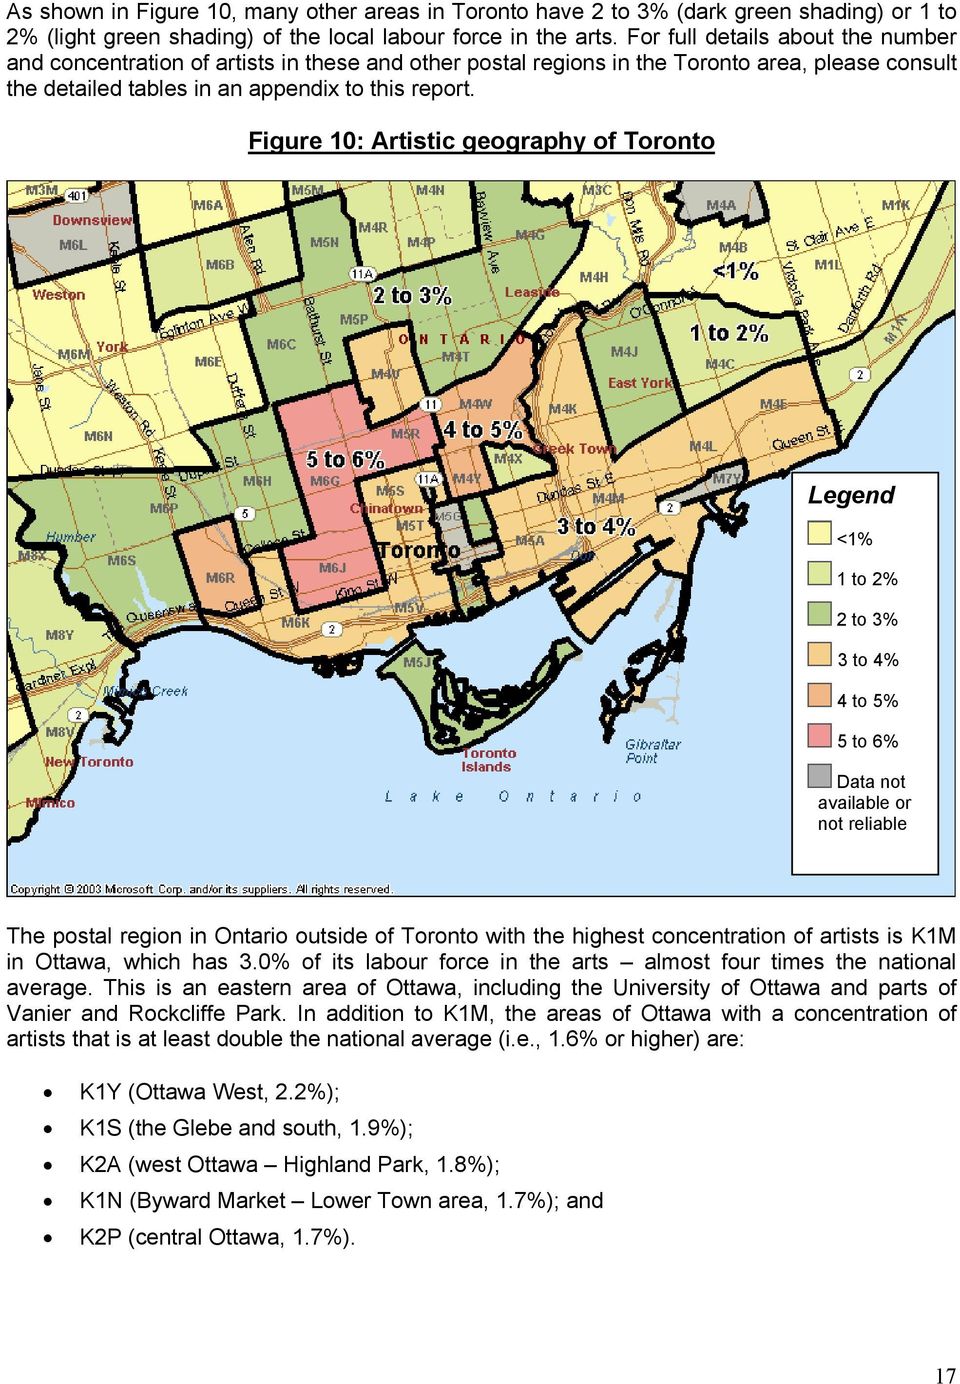 Figure 10: Artistic geography of Toronto 2 to 3% 3 to 4% 4 to 5% 5 to 6% Data not available or not reliable The postal region in Ontario outside of Toronto with the highest concentration of artists